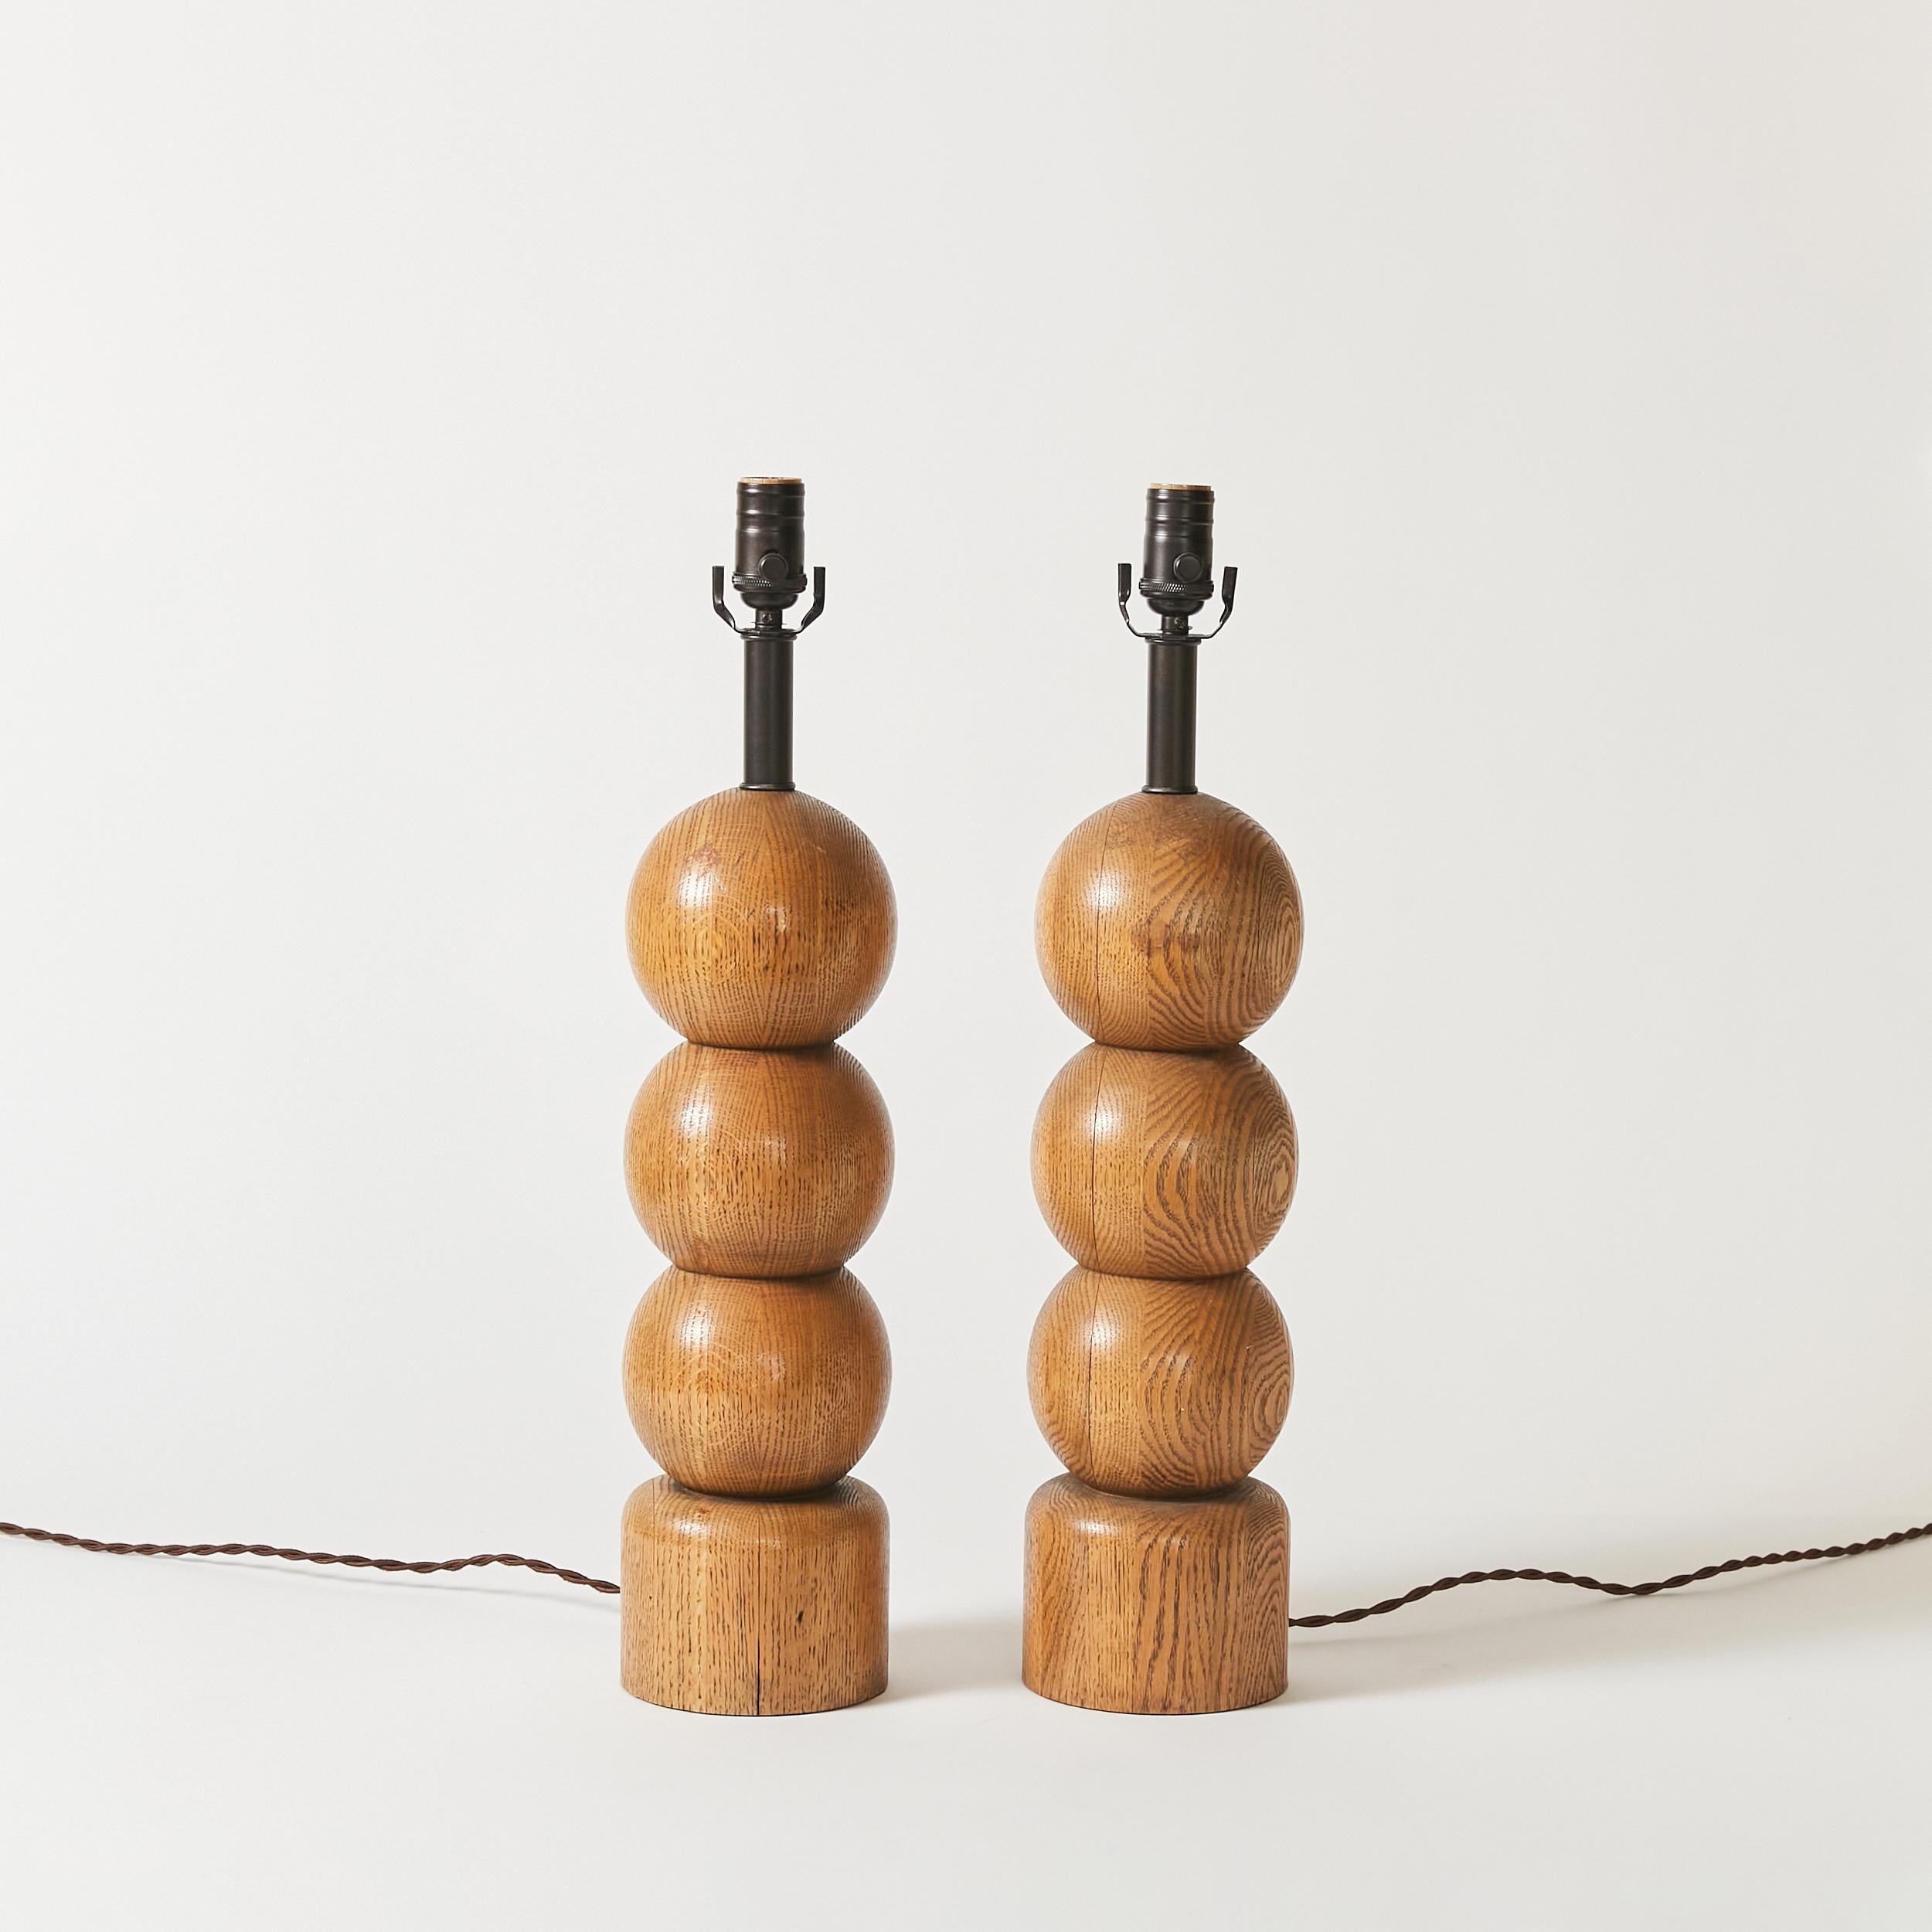 Set of two sculptural table lamps. Stacked wooden spheres resting on a pedestal. Original patina.
This item has been rewired with new hardware and braided cloth cord. This lamp does not include shade or harp.